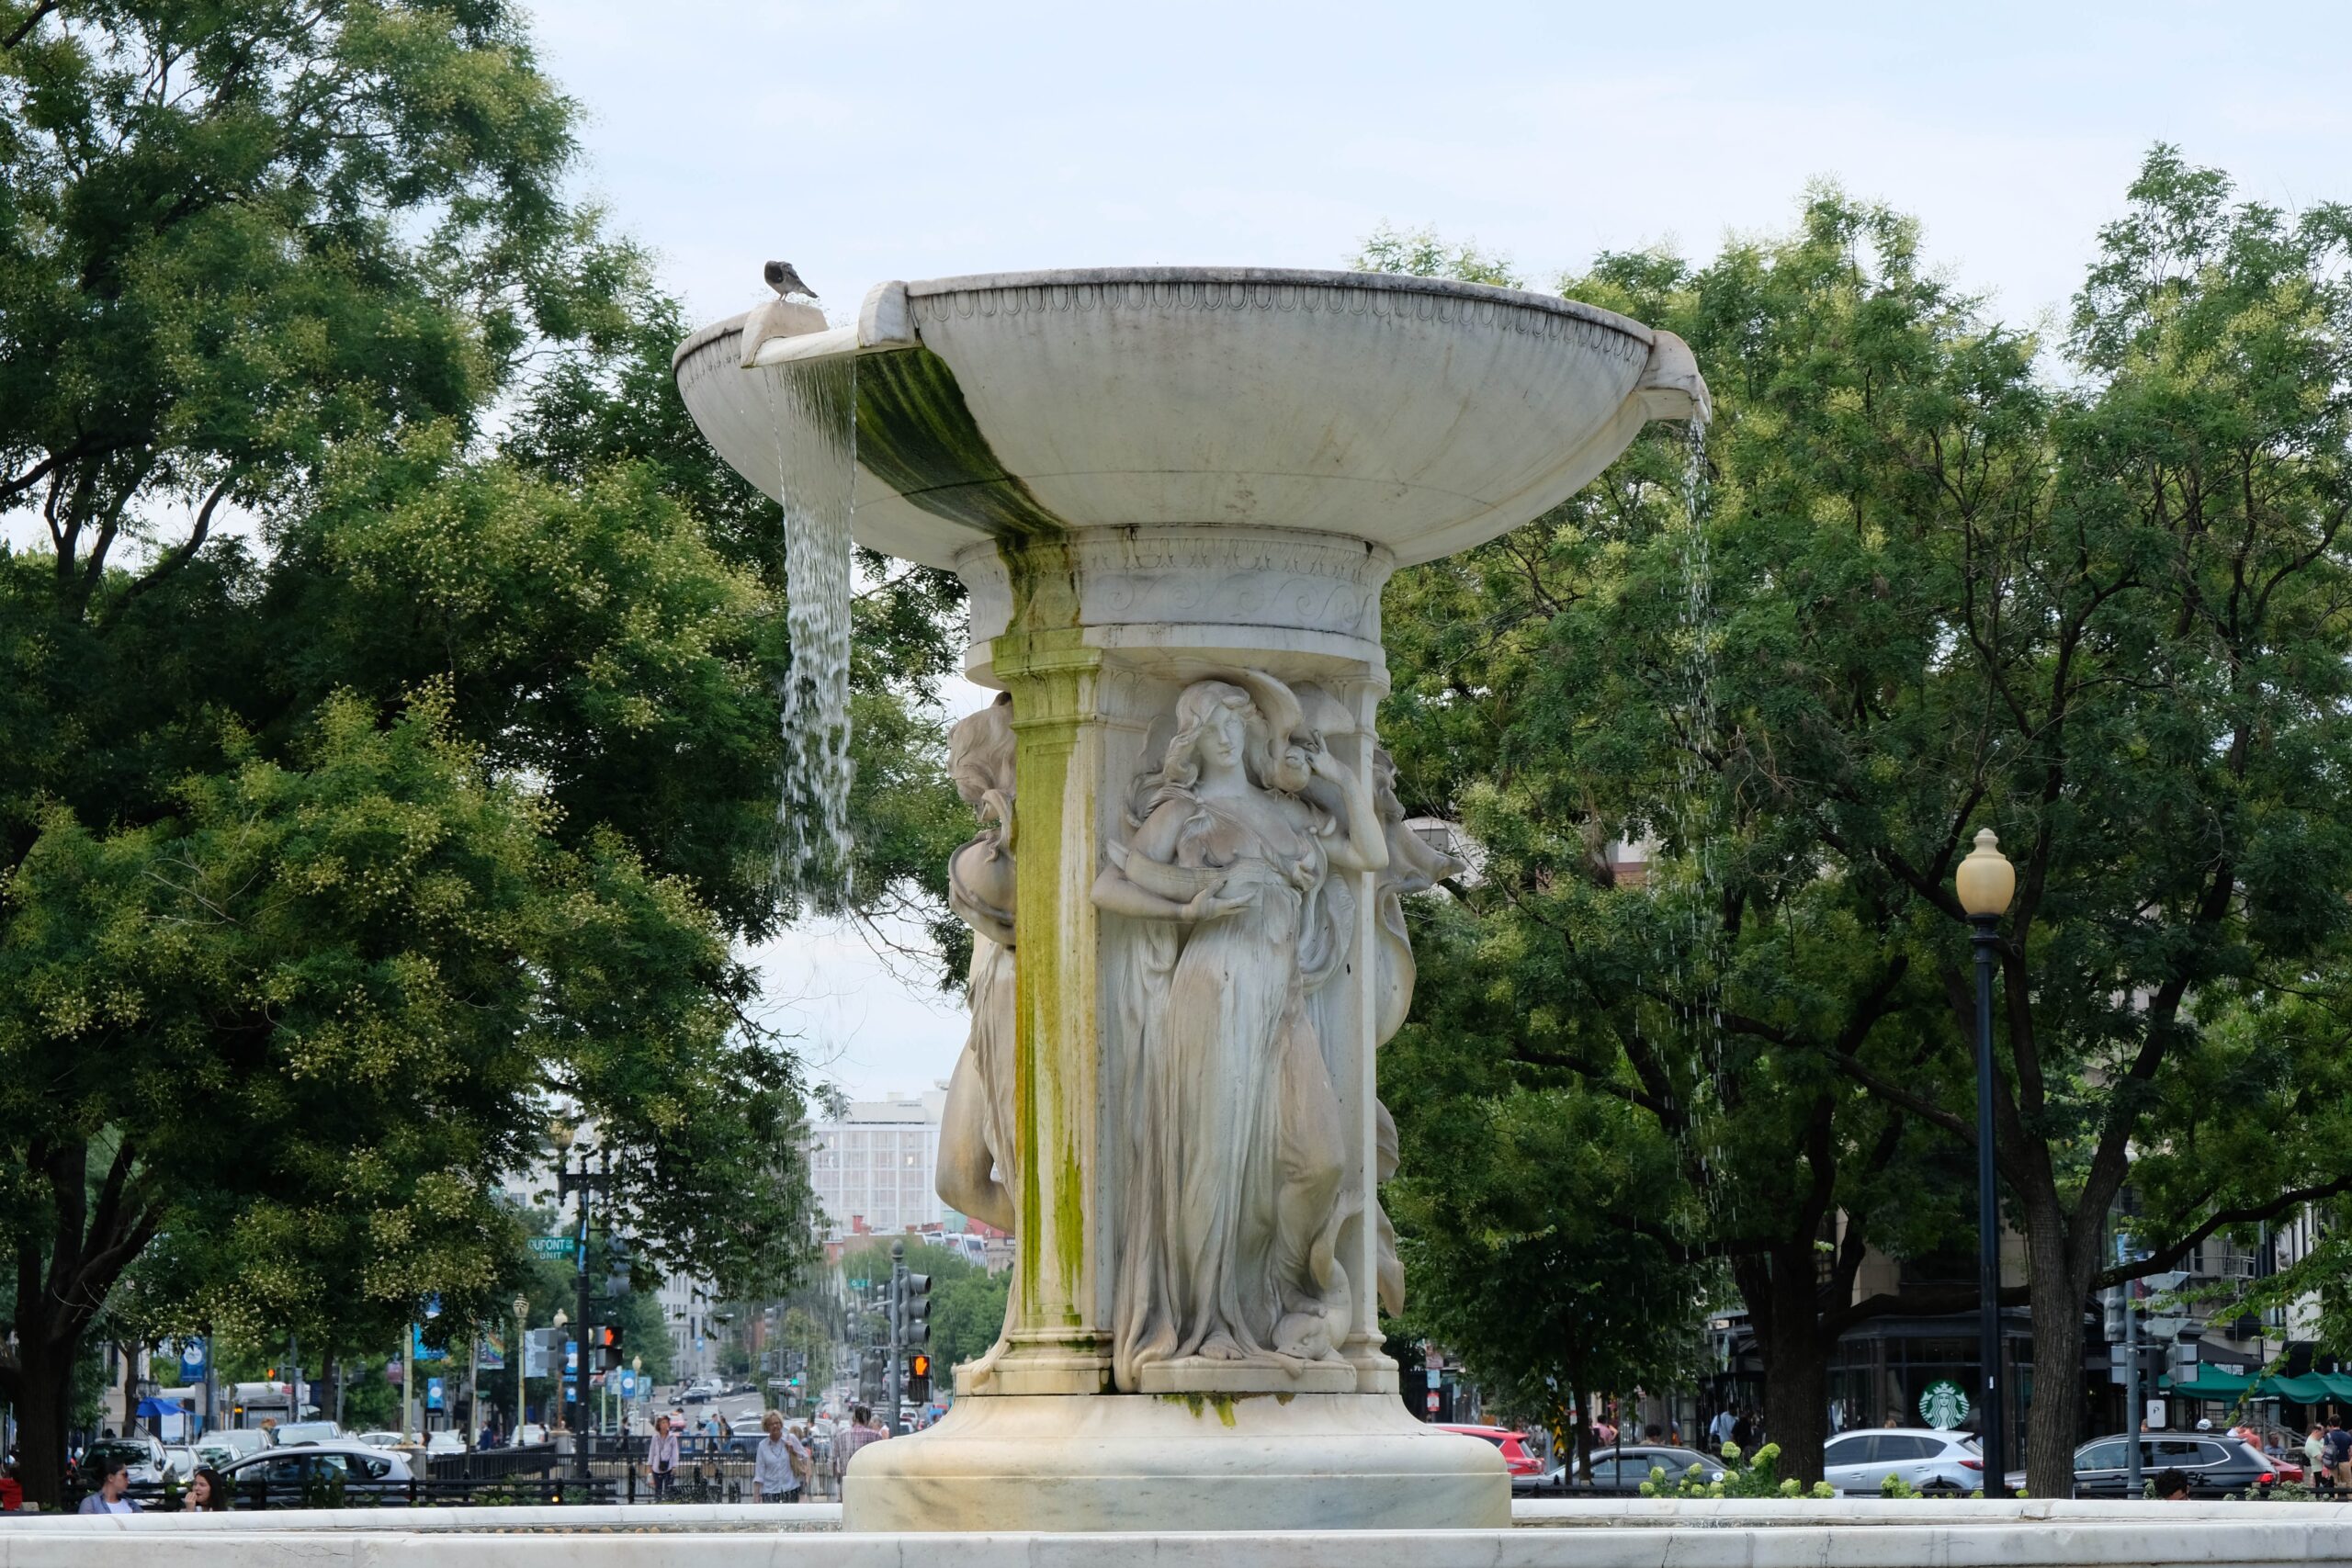 The Dupont Circle Fountain